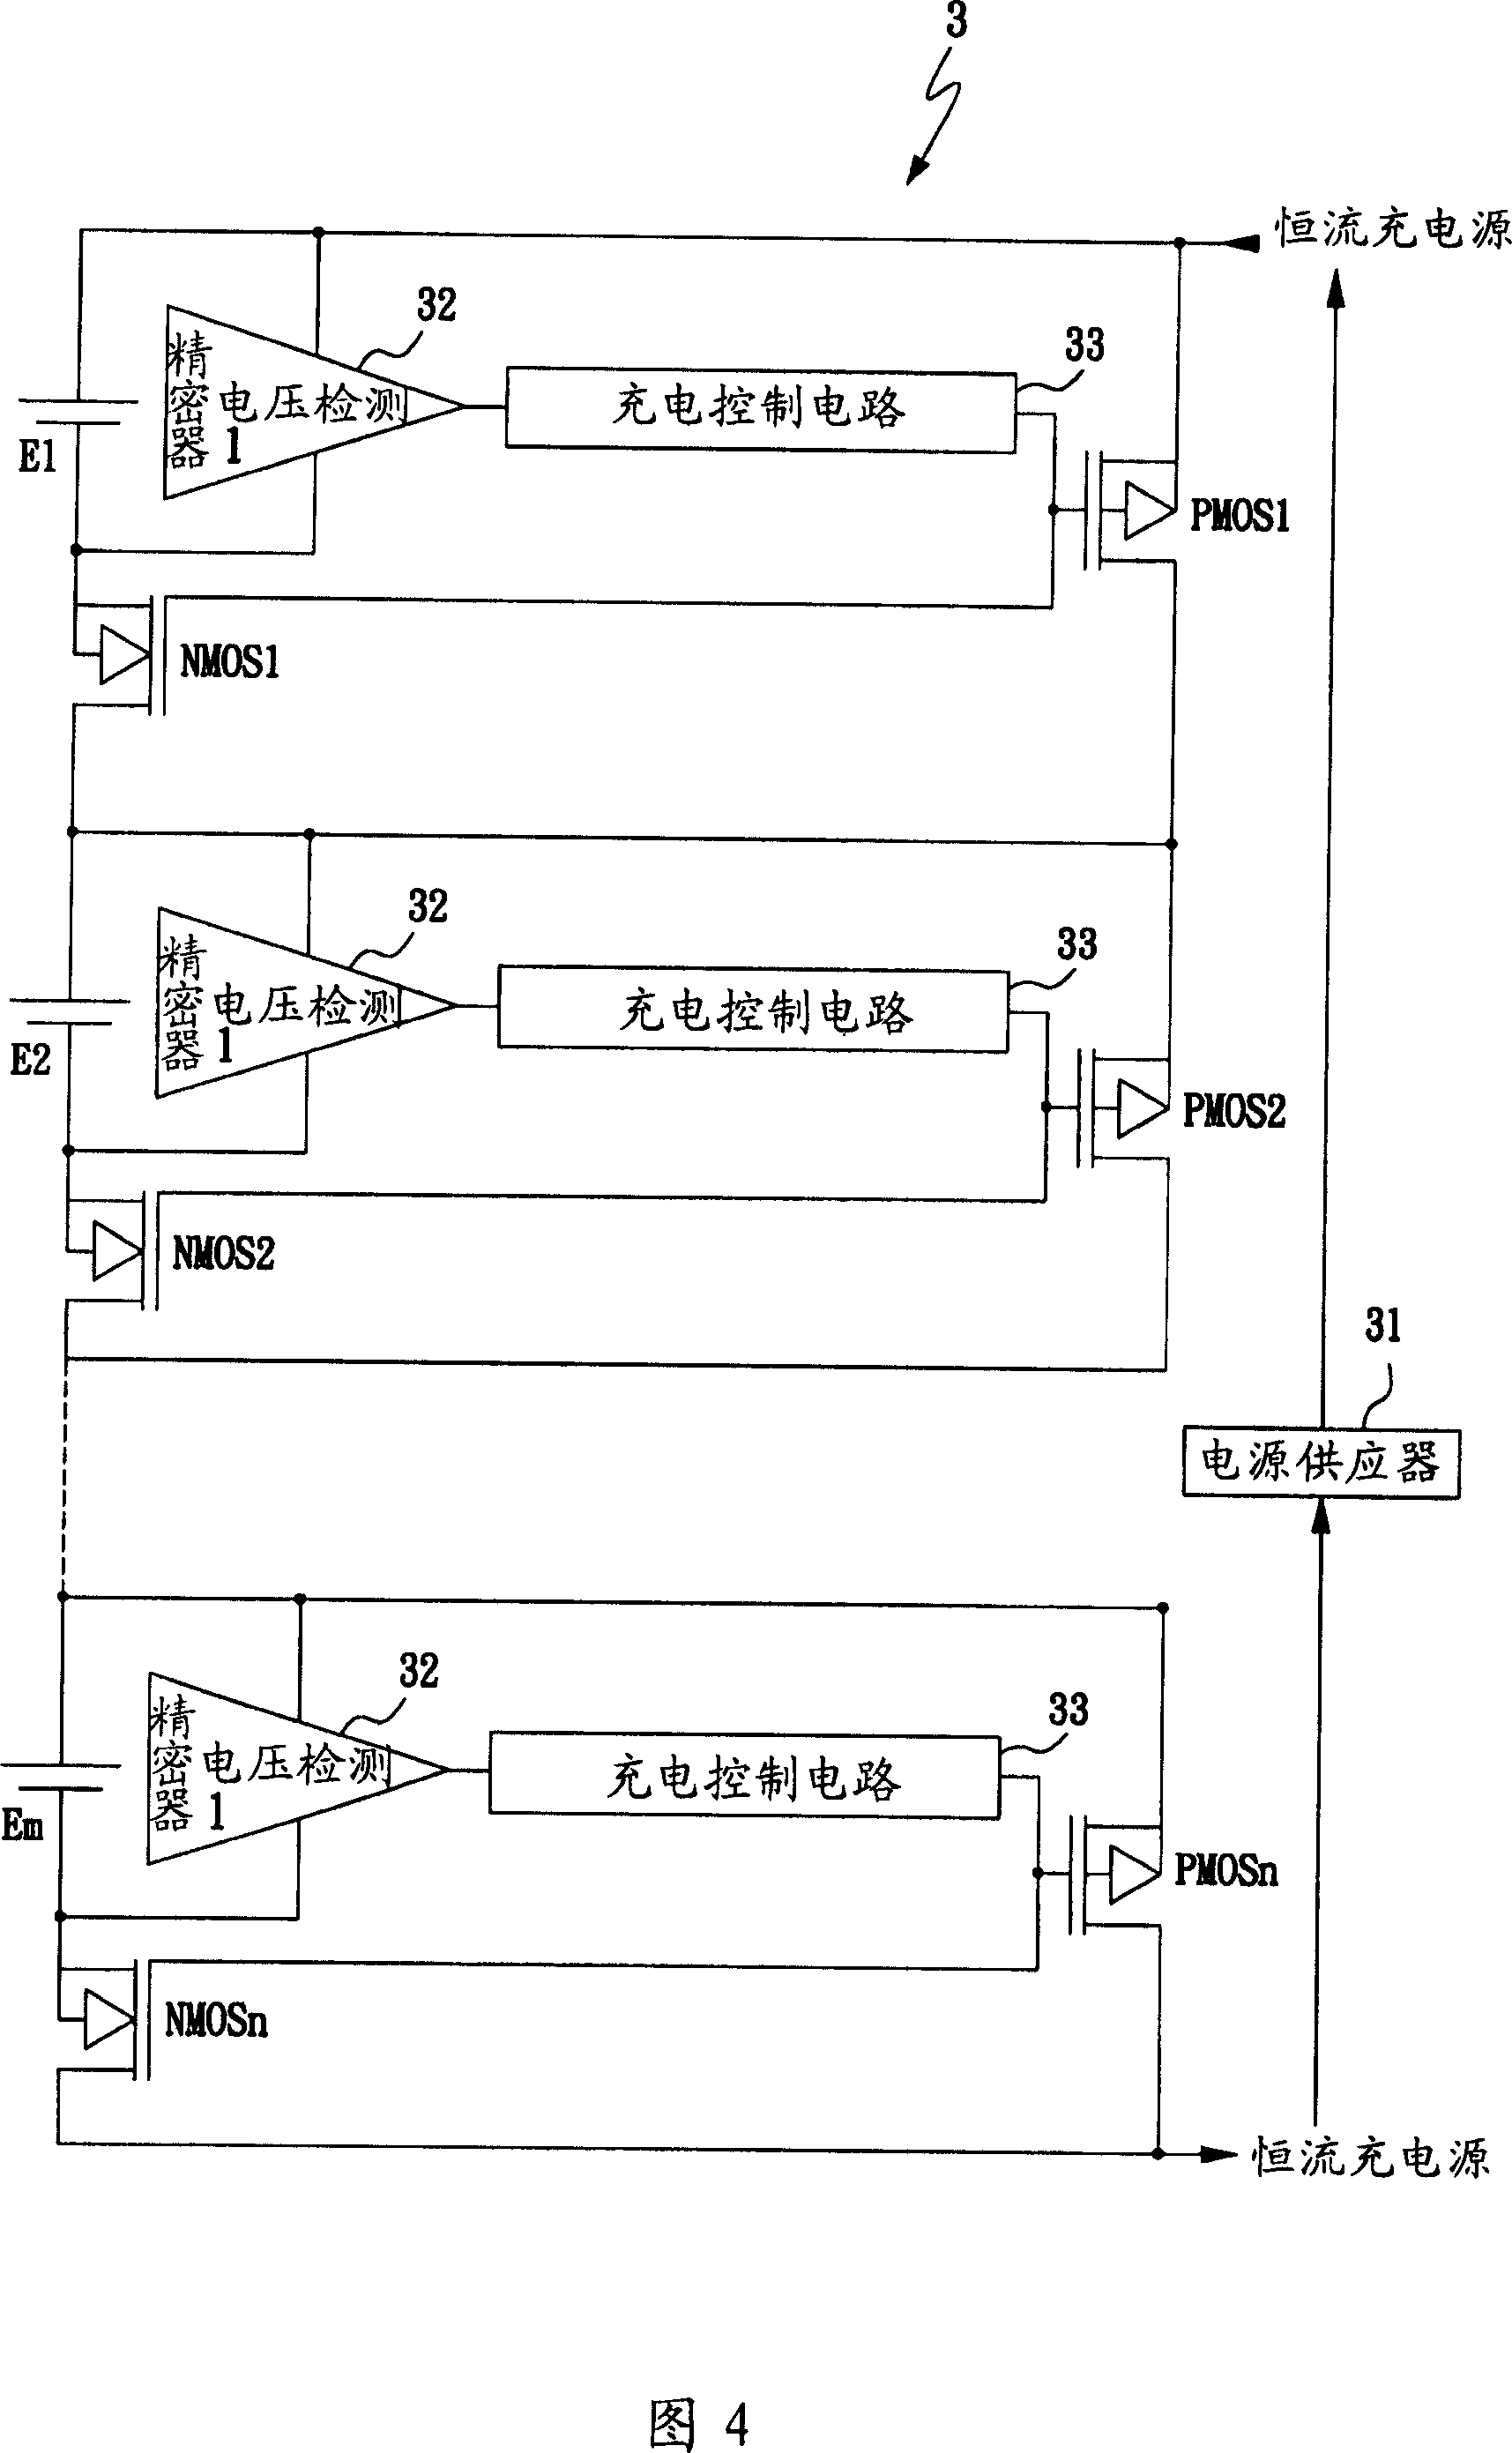 A charging circuit without loss balance charging multiple serial batteries